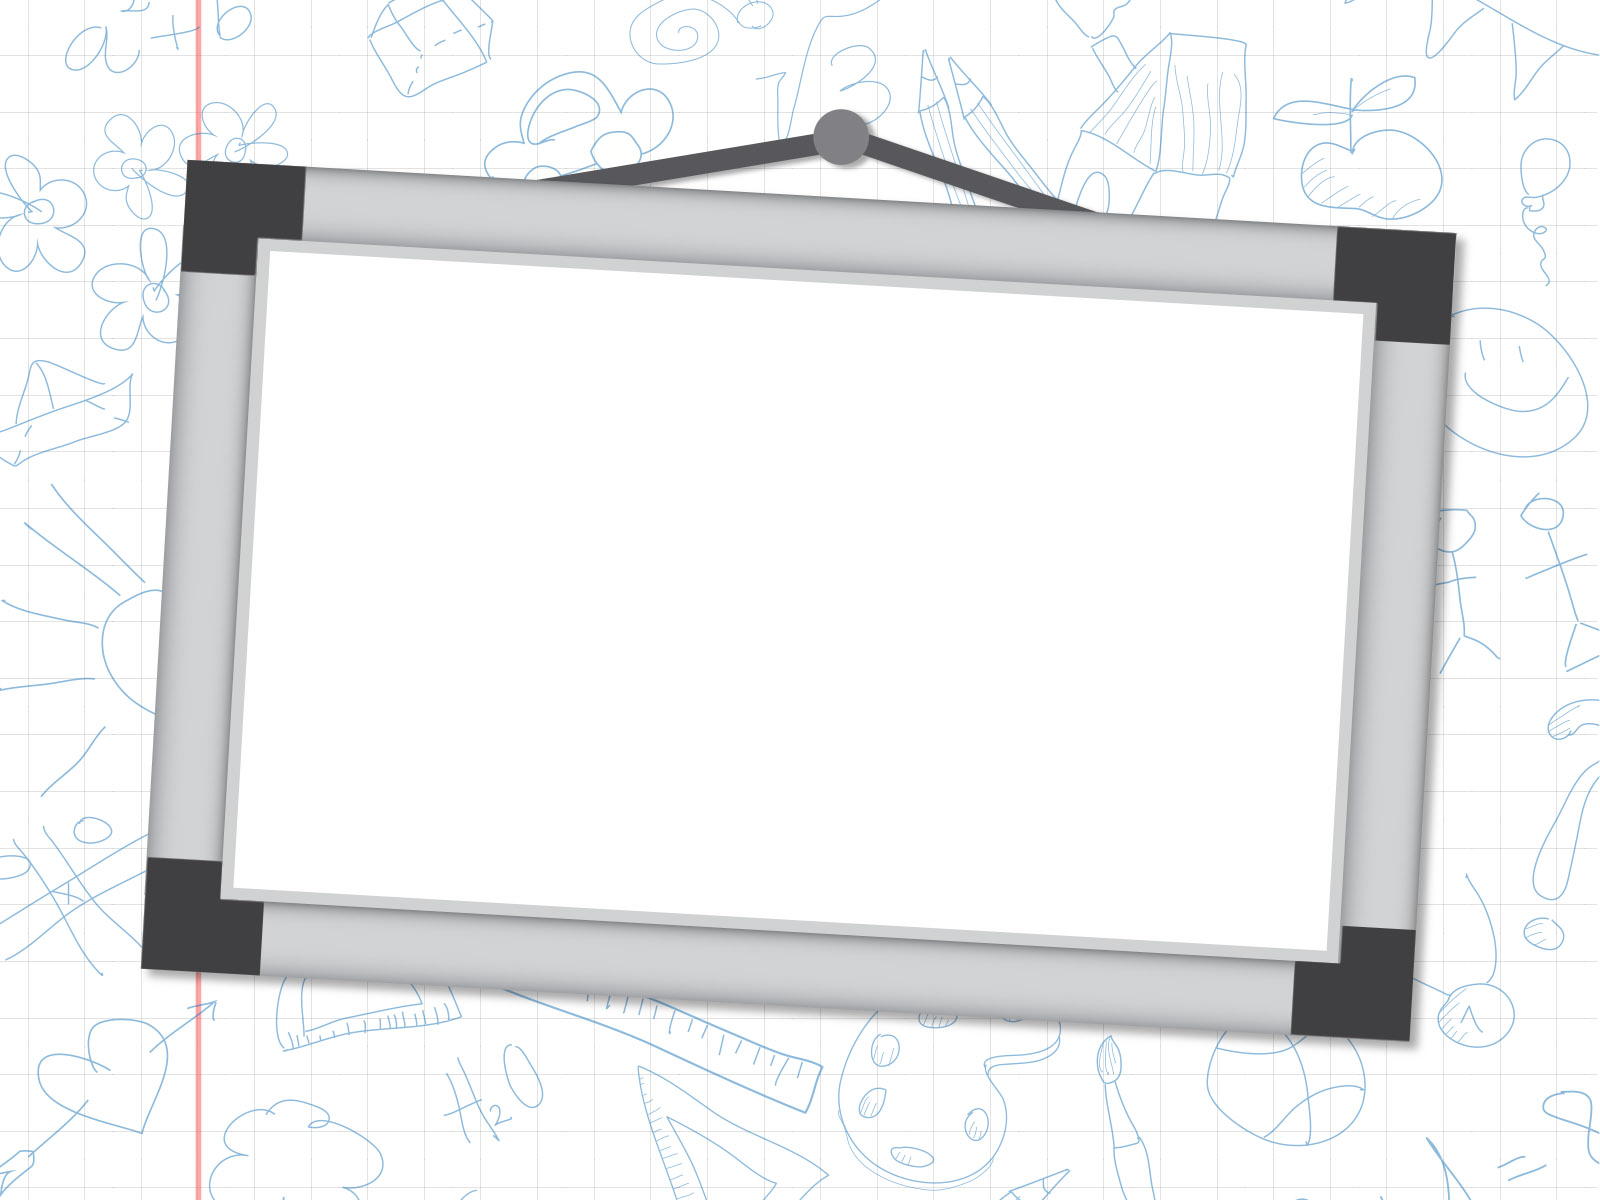 Education PPT Backgrounds Templates - Download Free Education ...